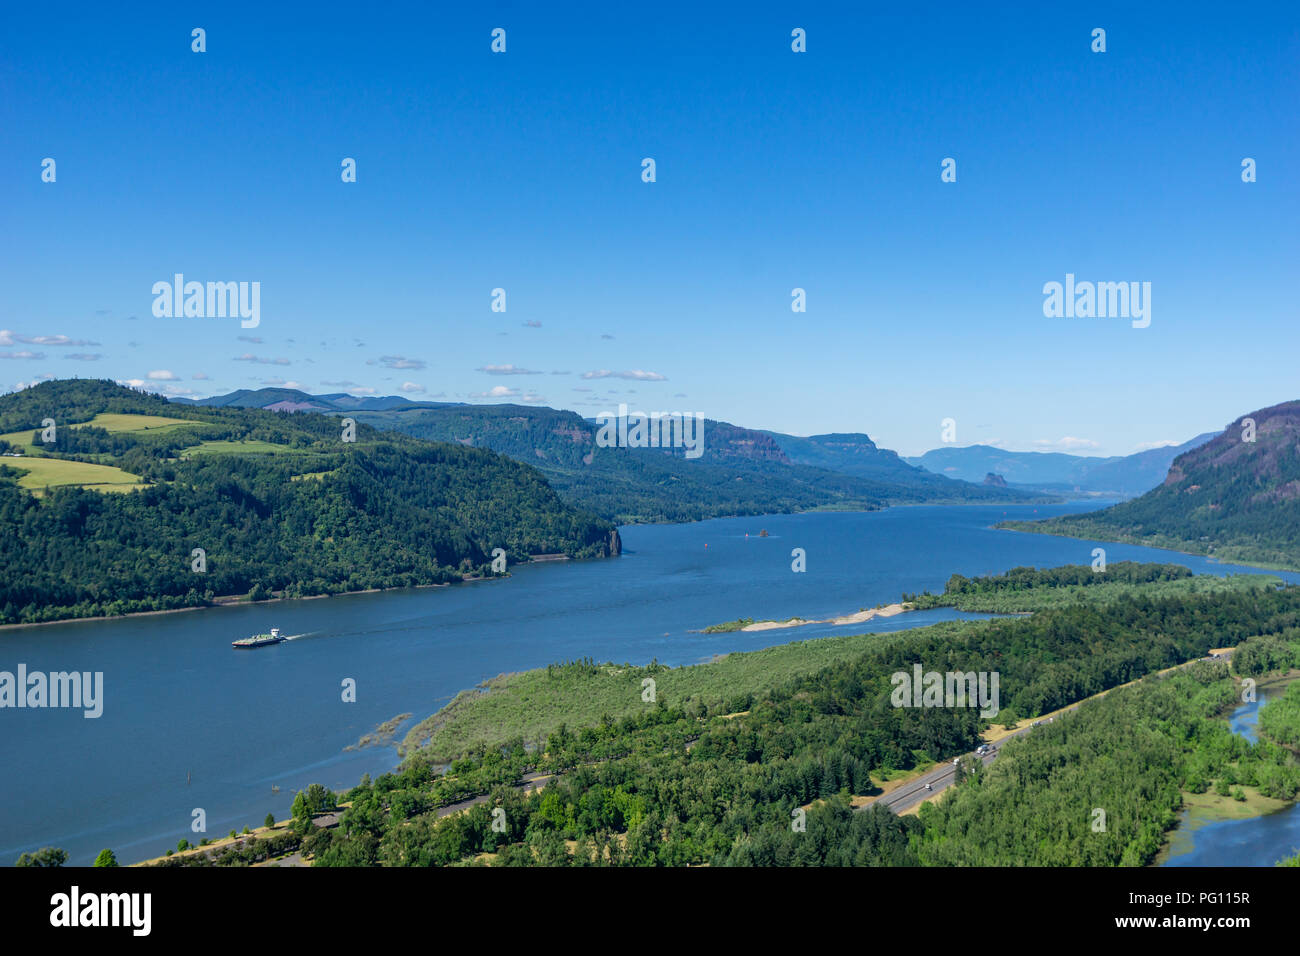 Overlook on the Columbia River gorge near Portland on a beautiful day, Oregon, historic US route 30, Vista House, USA. Stock Photo